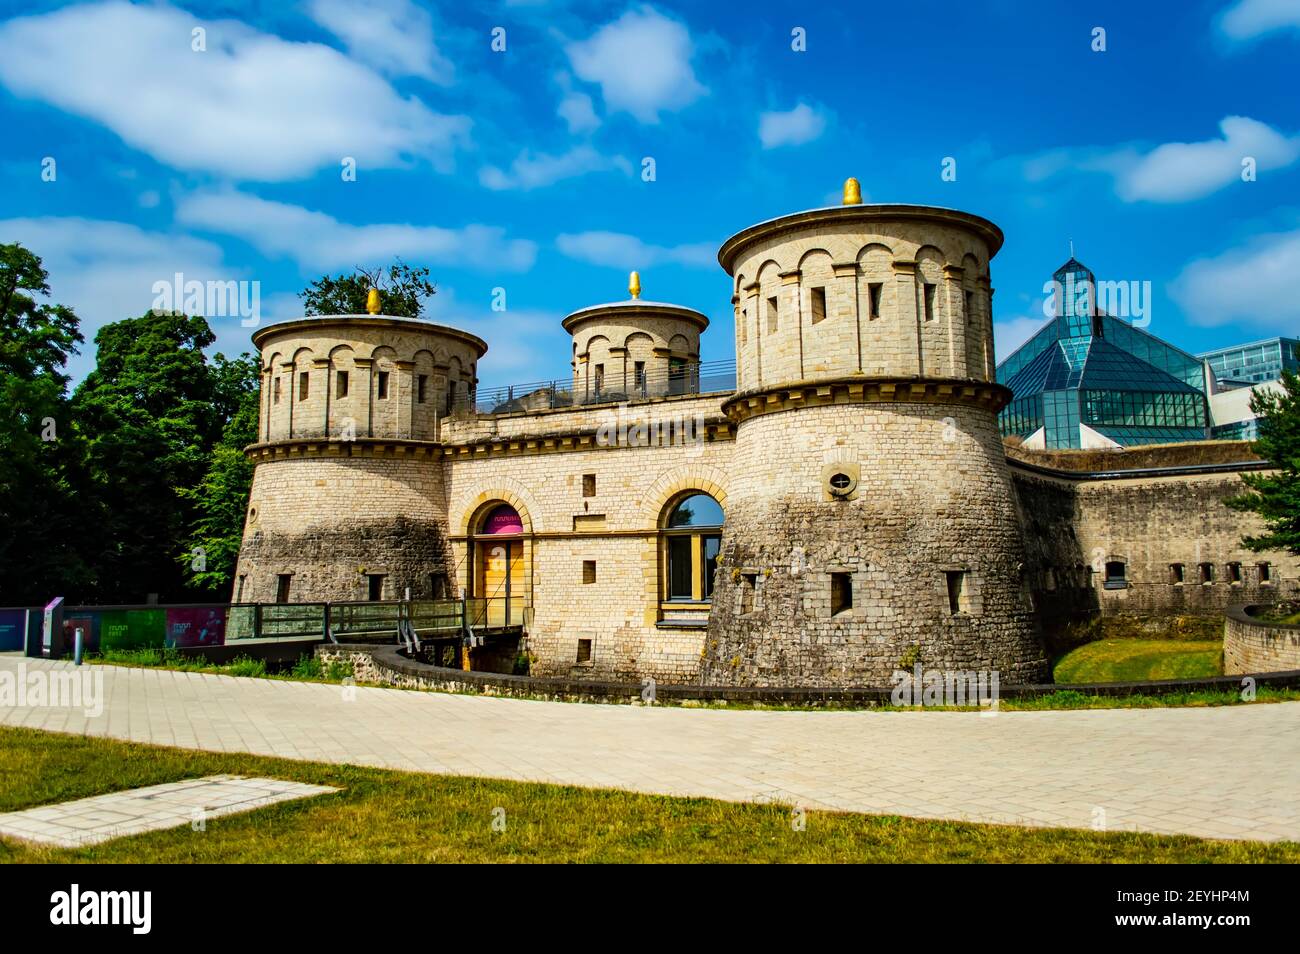 Luxembourg city, Luxembourg - July 15, 2019: Famous medieval Three Acorns fortress (Fort Thungen) in Luxembourg city Stock Photo